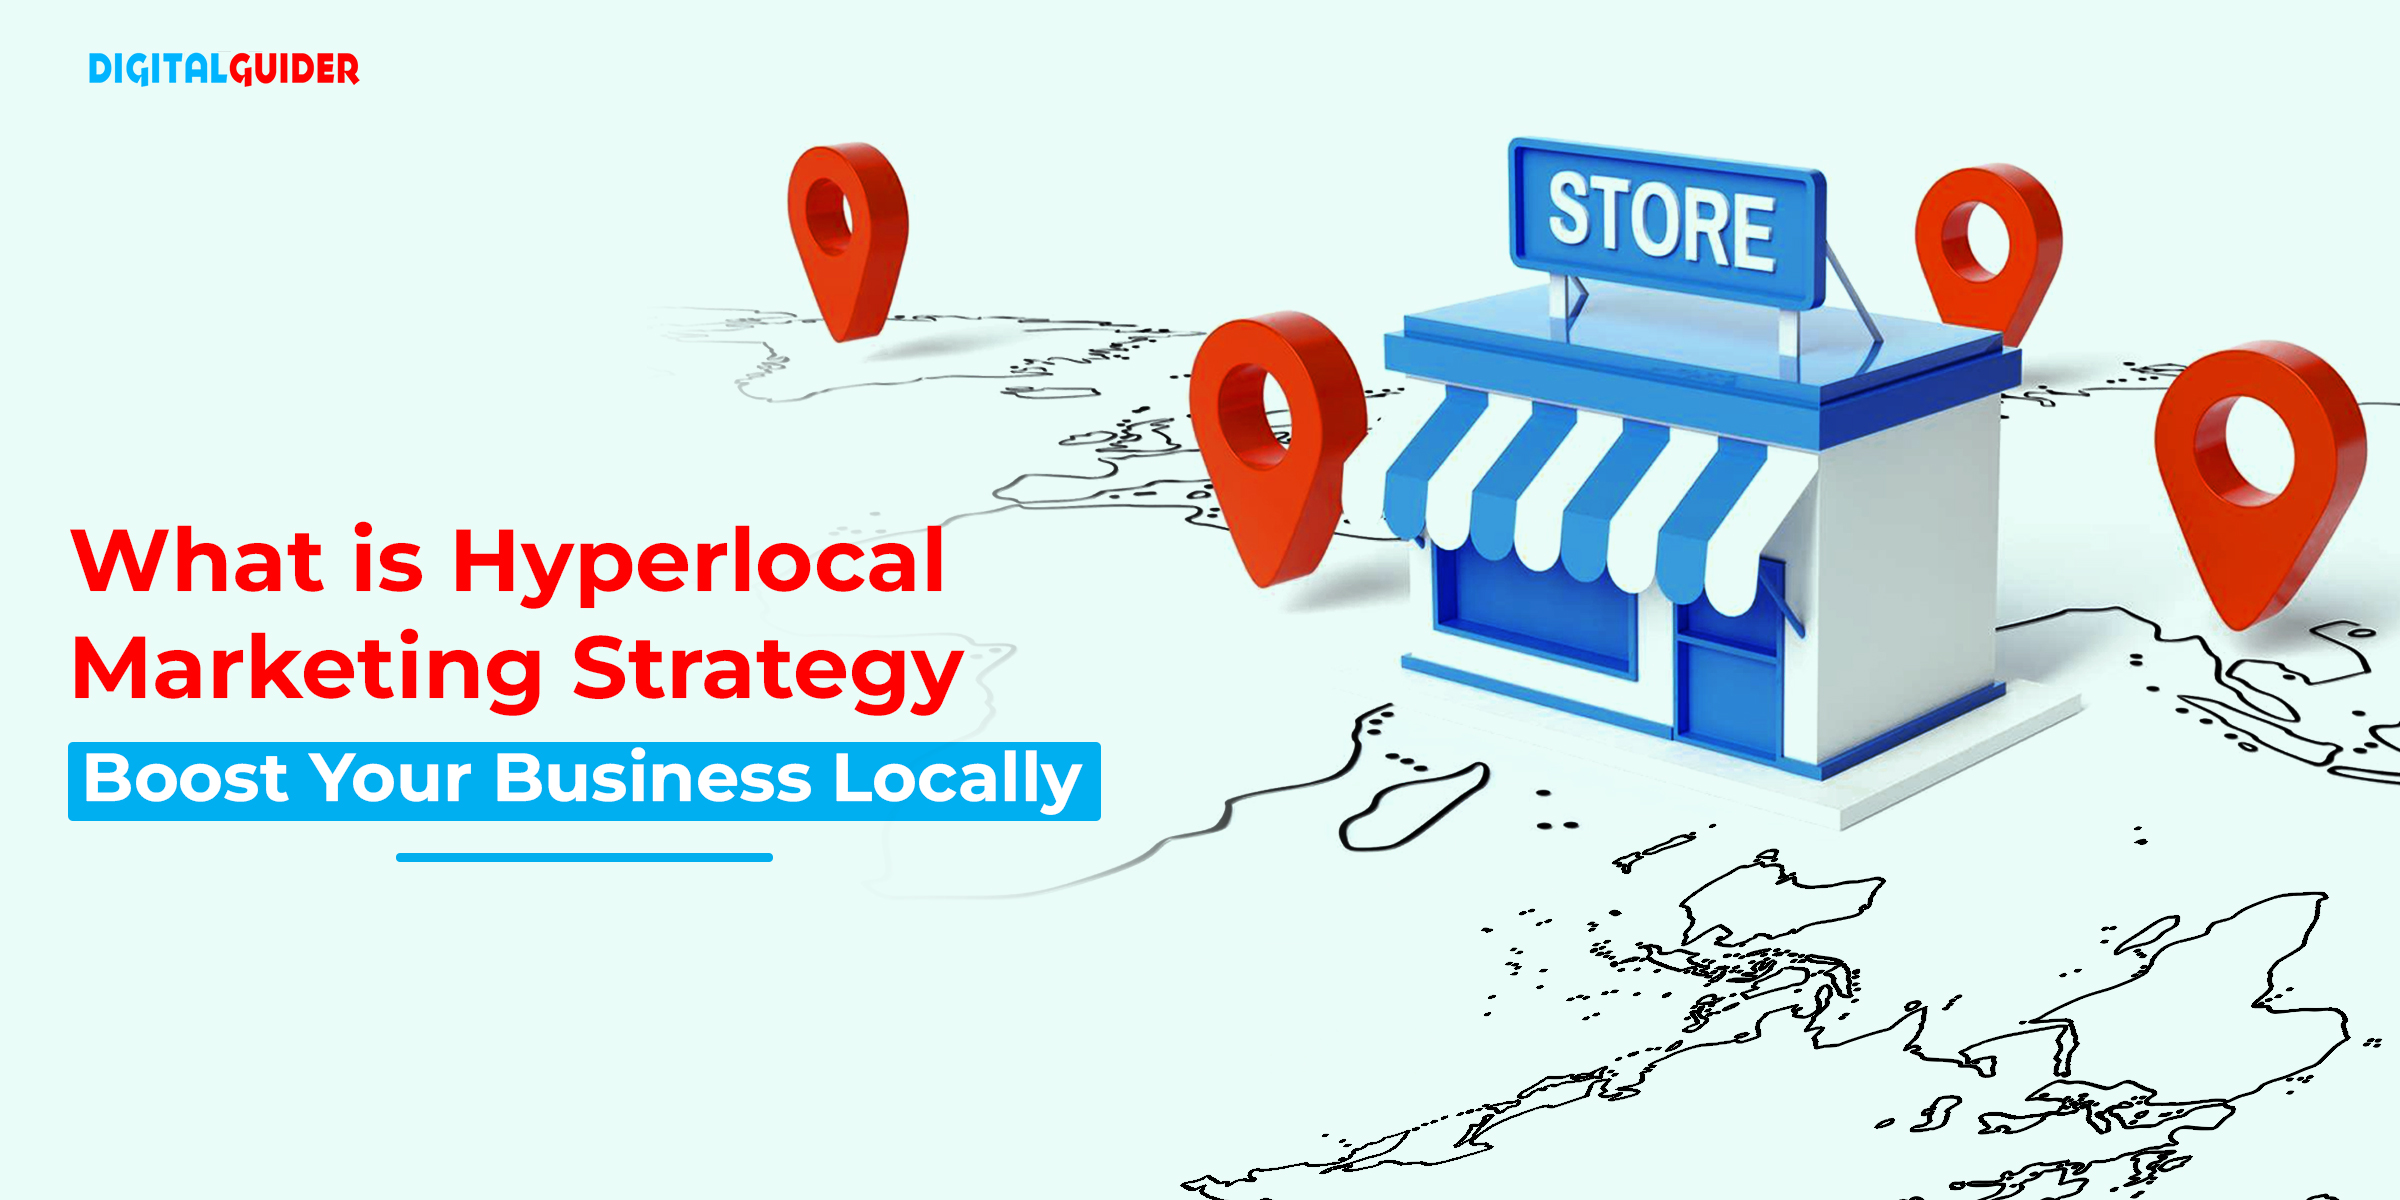 What is Hyperlocal Marketing Strategy Boost Your Business Locally